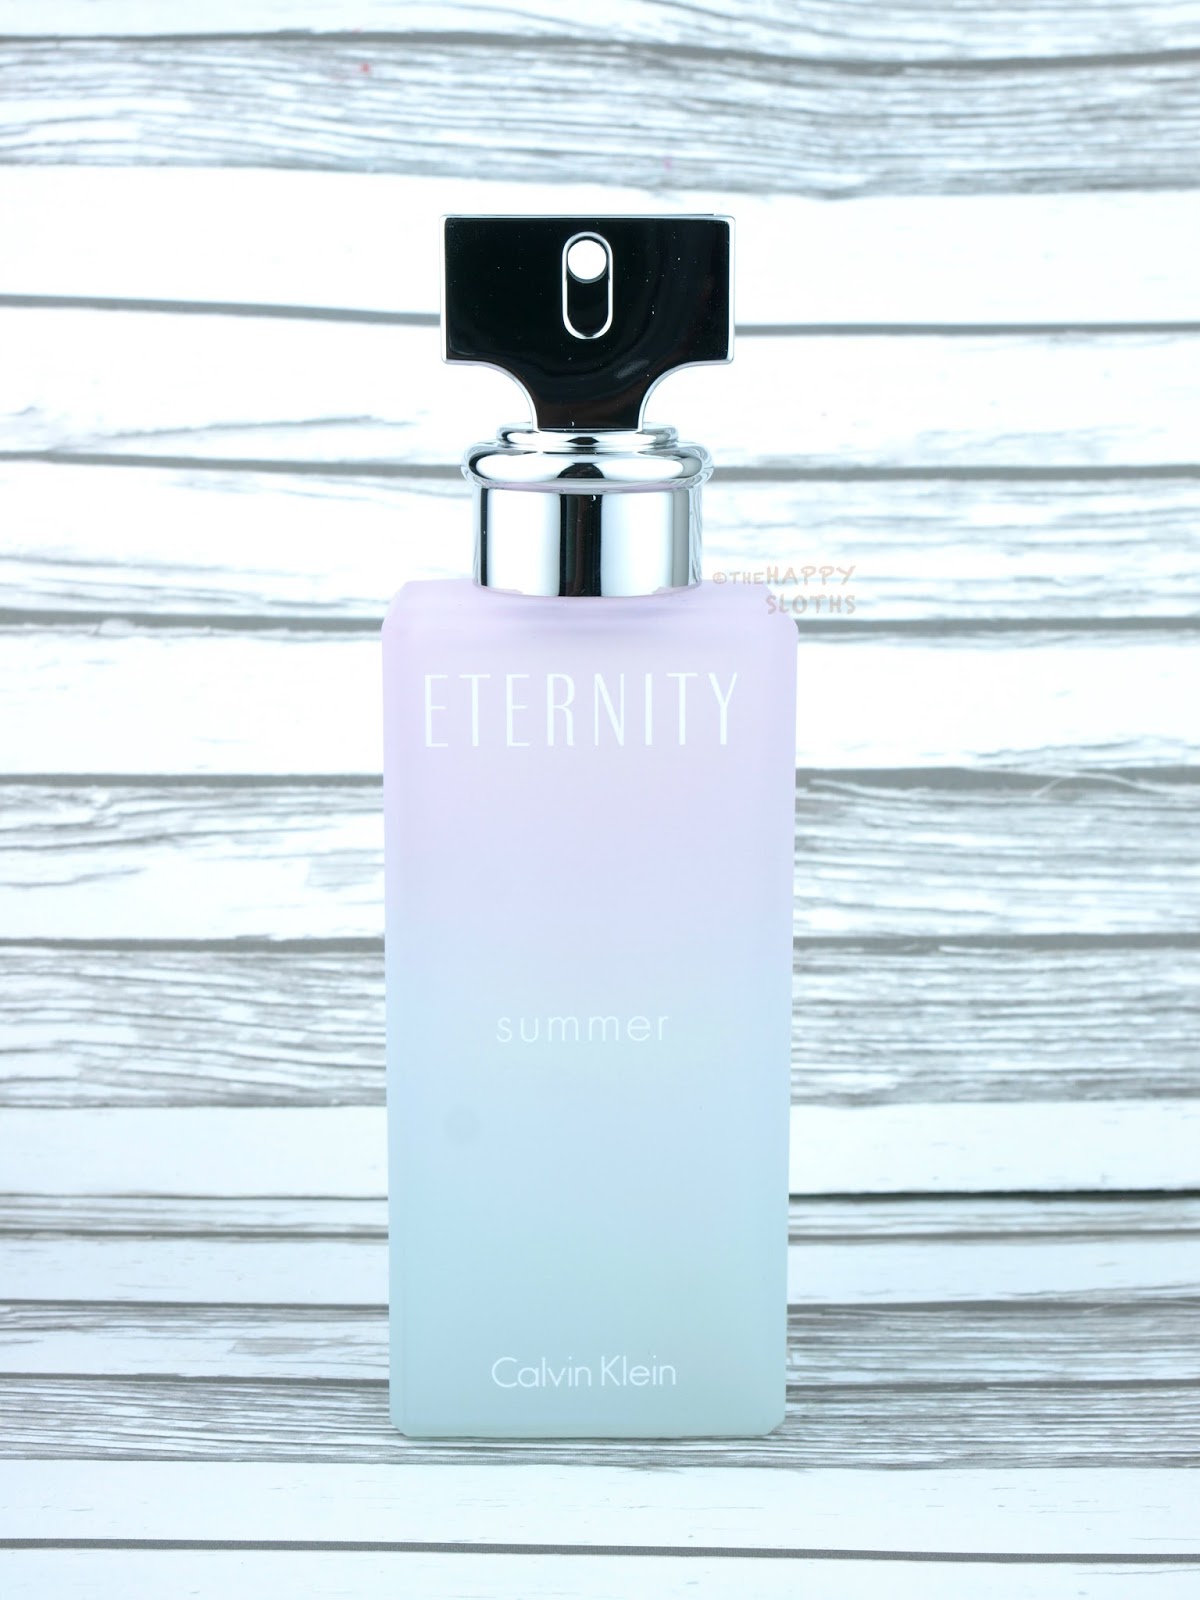 Noord West onderzeeër Fonetiek Calvin Klein Eternity Summer 2016 Collection: Review | The Happy Sloths:  Beauty, Makeup, and Skincare Blog with Reviews and Swatches